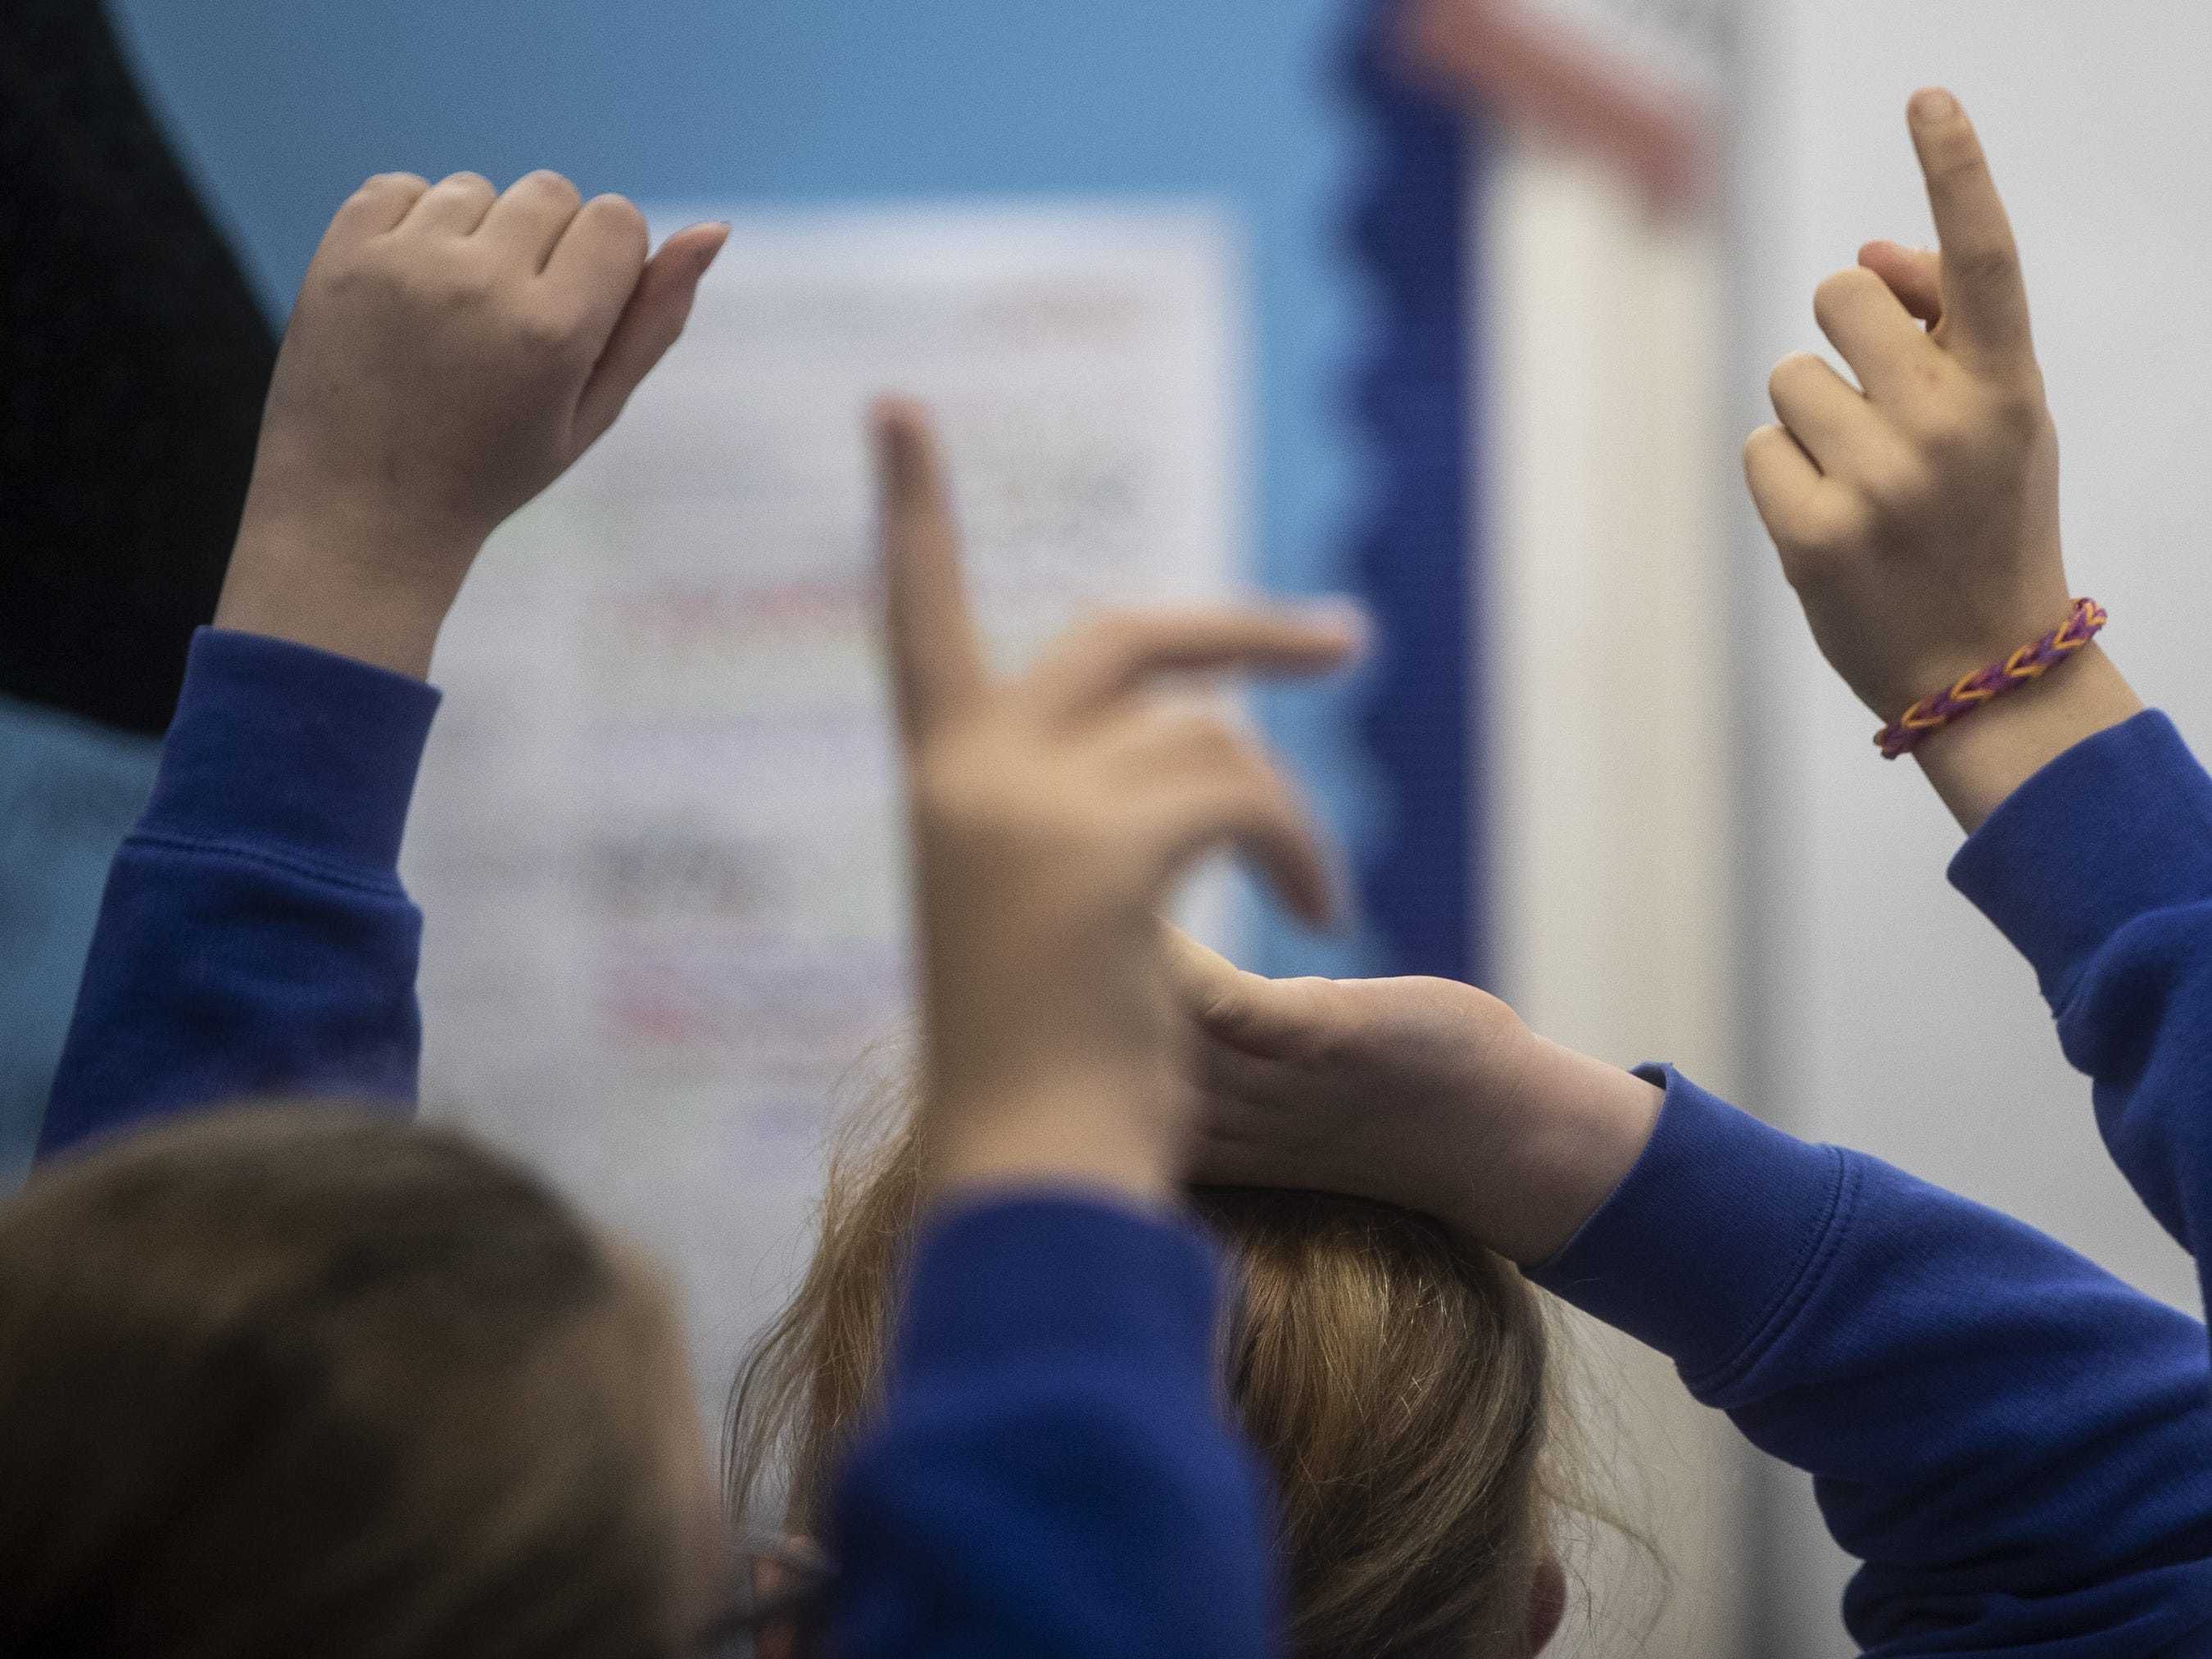 Limited funding commitments for pupils with special needs ‘poses serious threat’